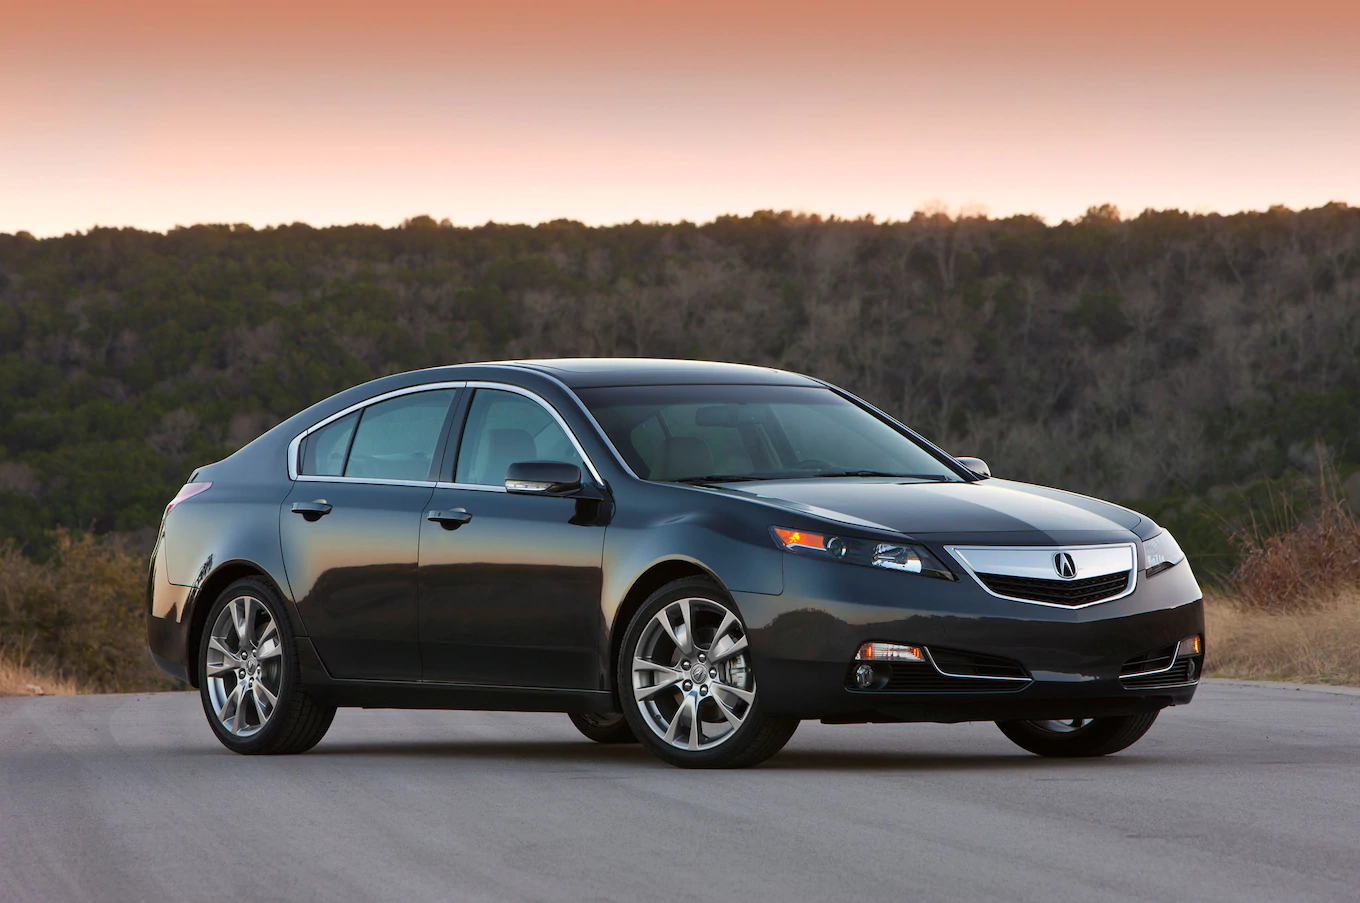 2013-Acura-TL-SH-AWD-Front-View.jpg